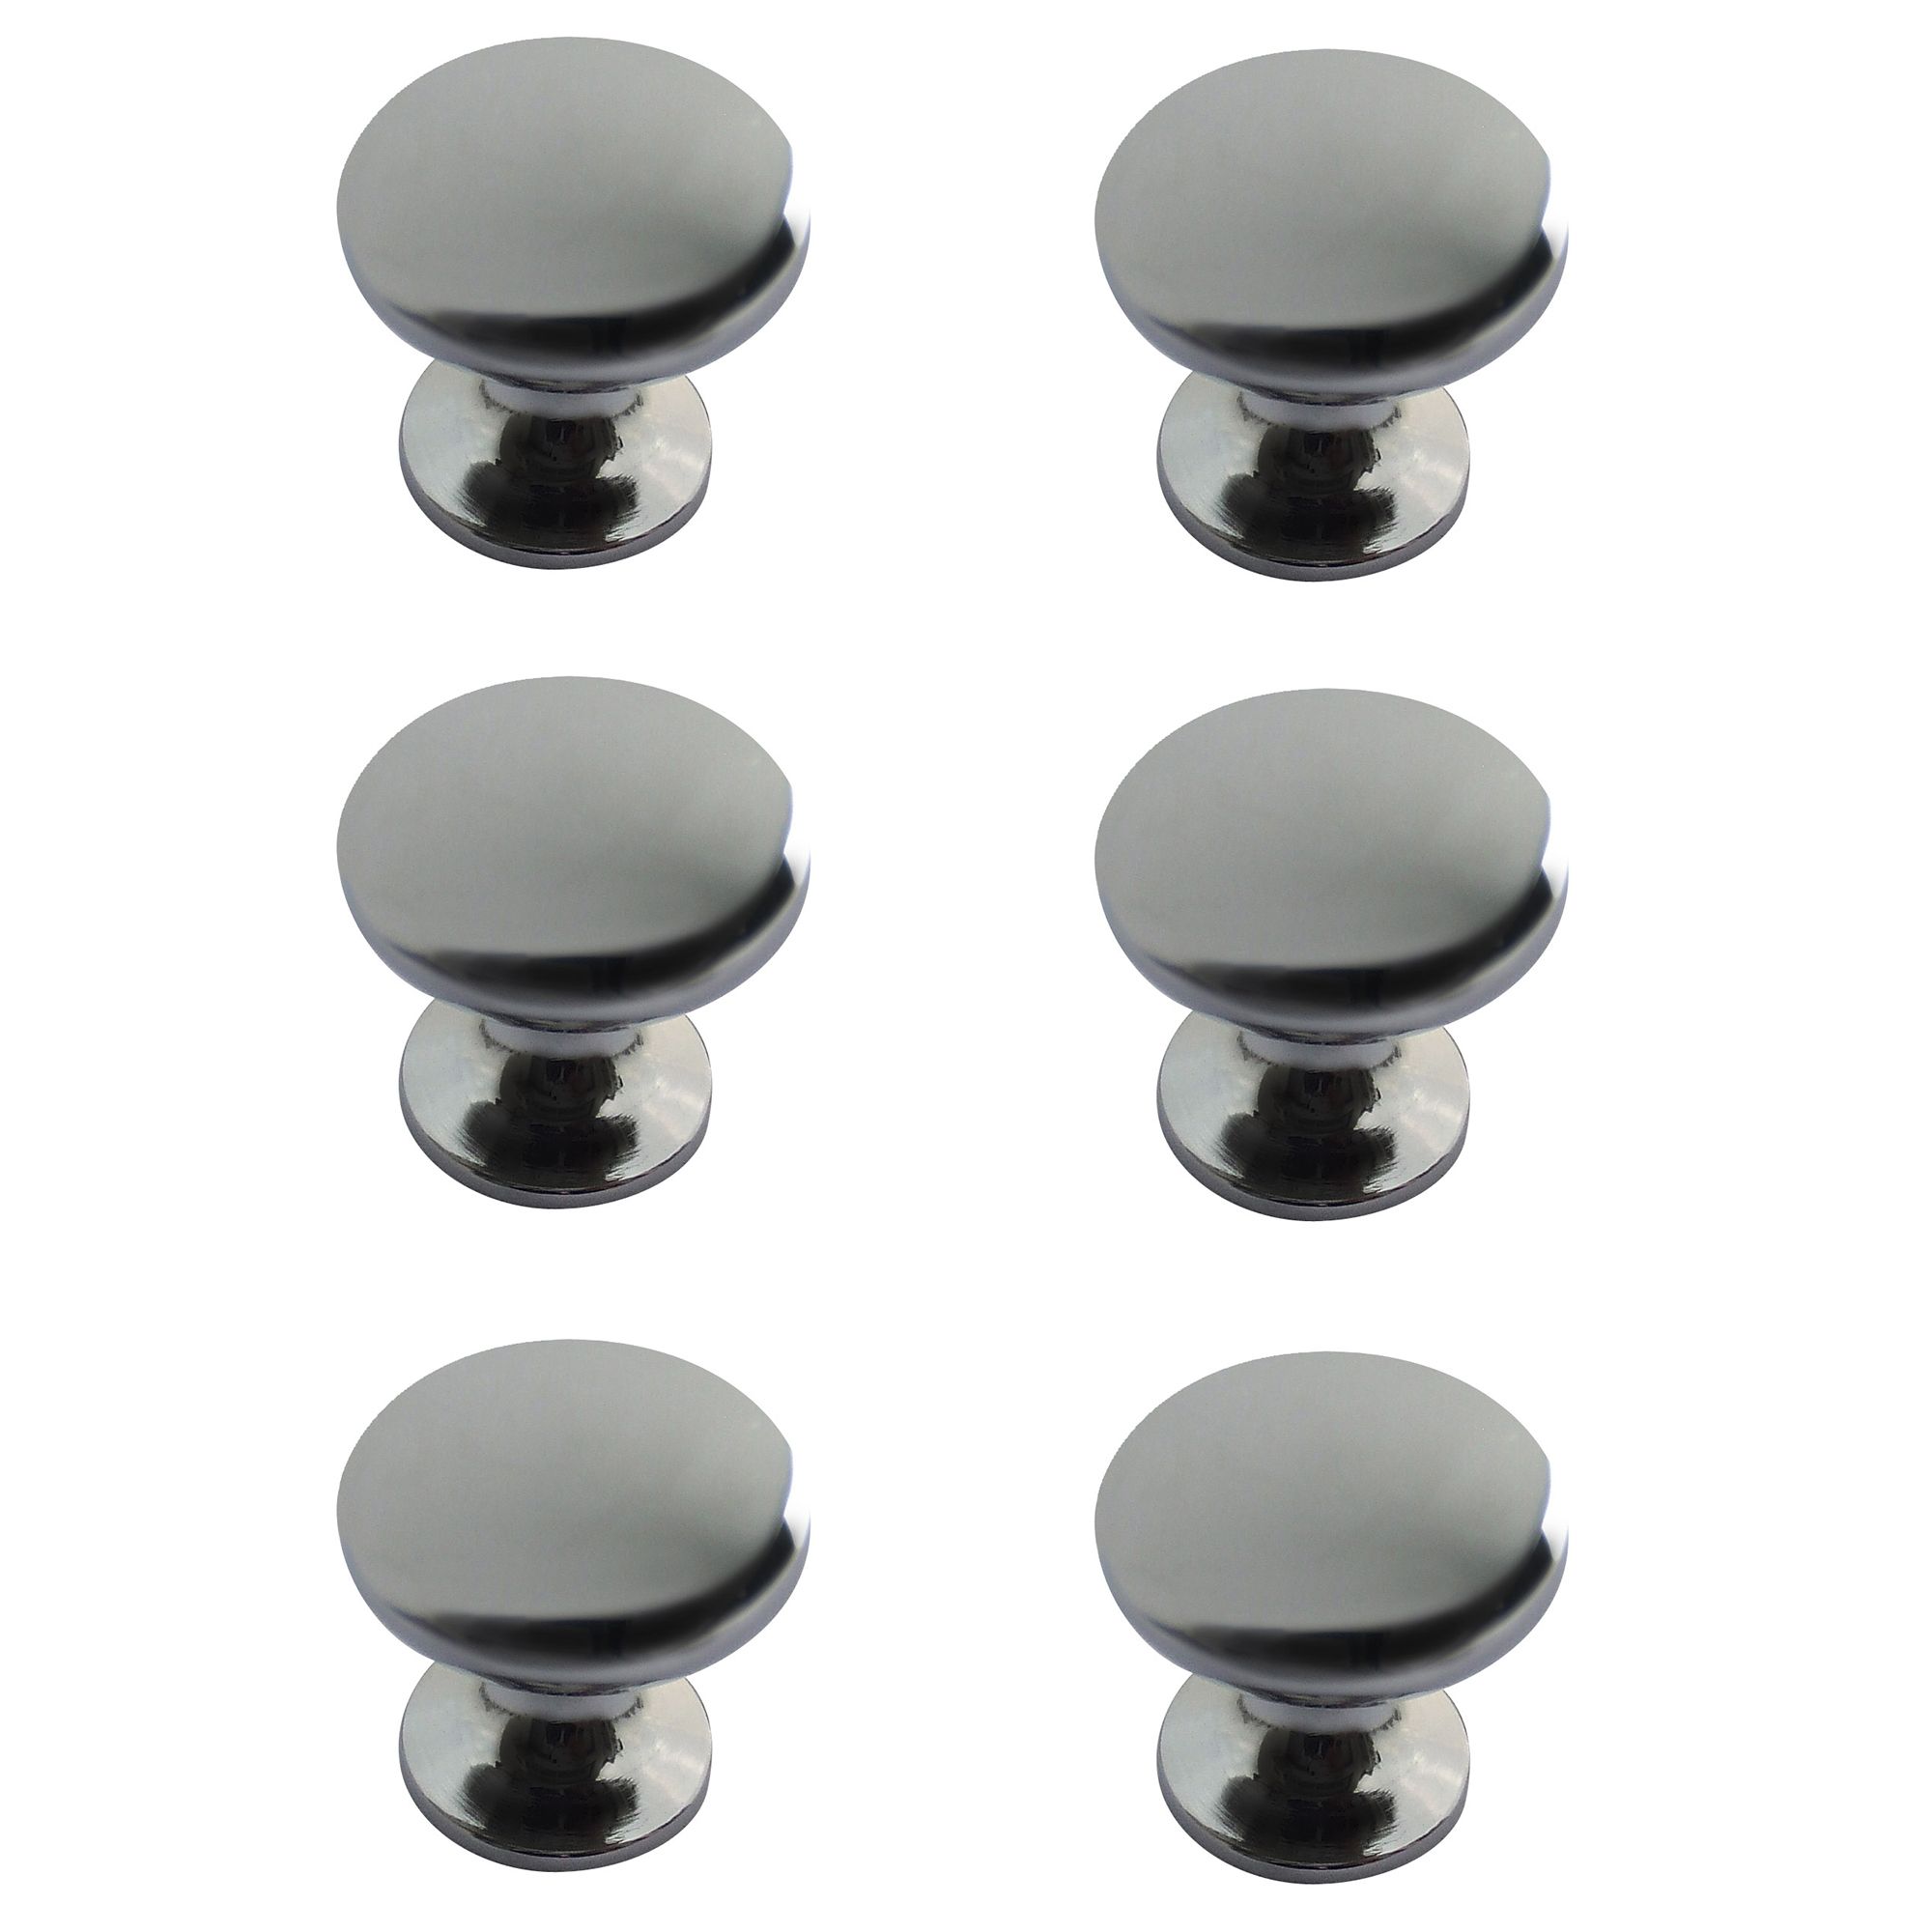 Zinc alloy Chrome effect Round Furniture Knob, Pack of 6